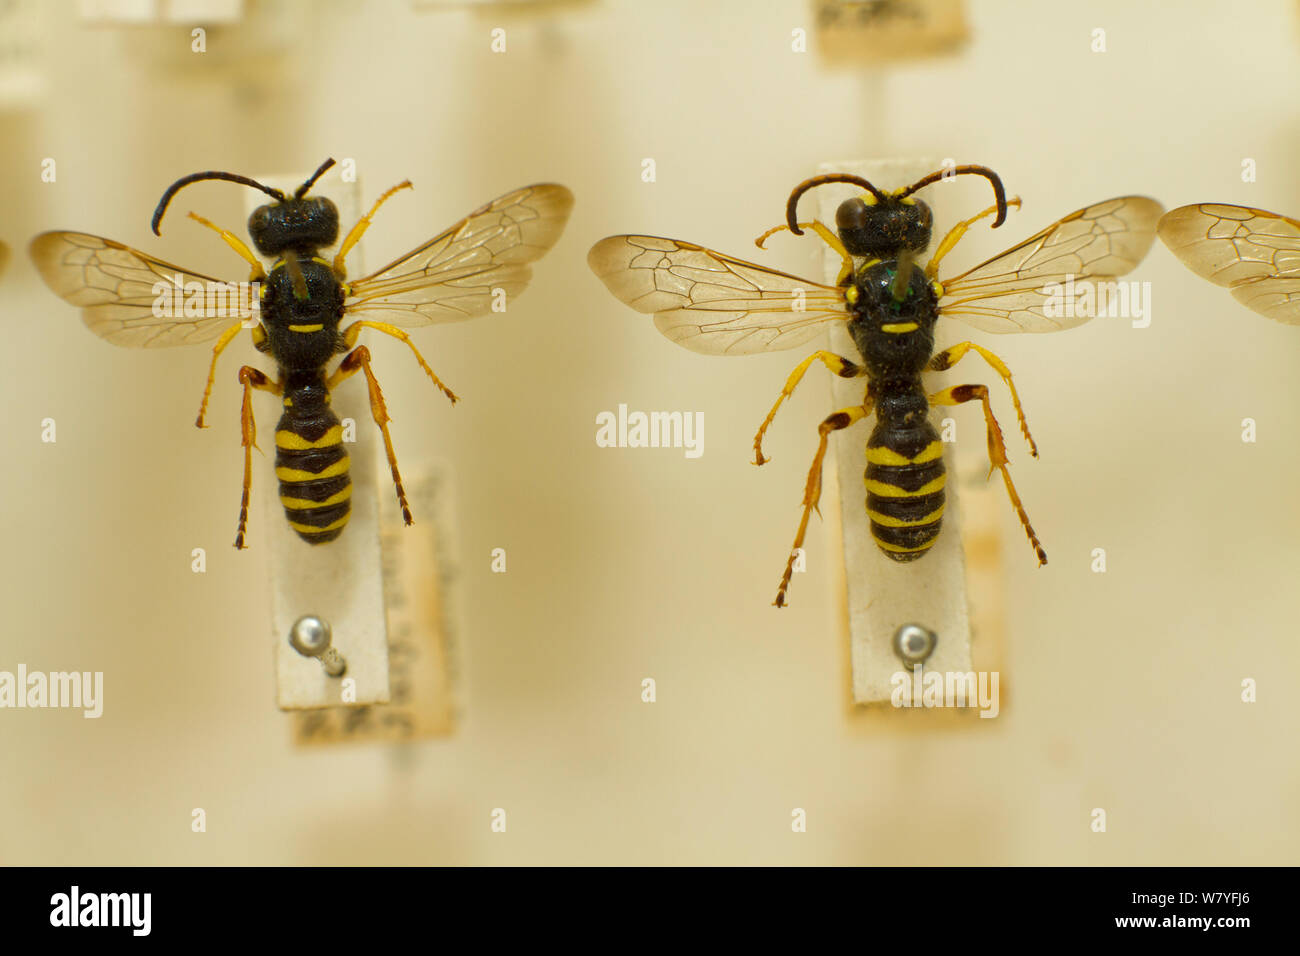 Solitary Bees, wasp mimicking species, Oxford Natural History museum, Oxford, UK. Stock Photo